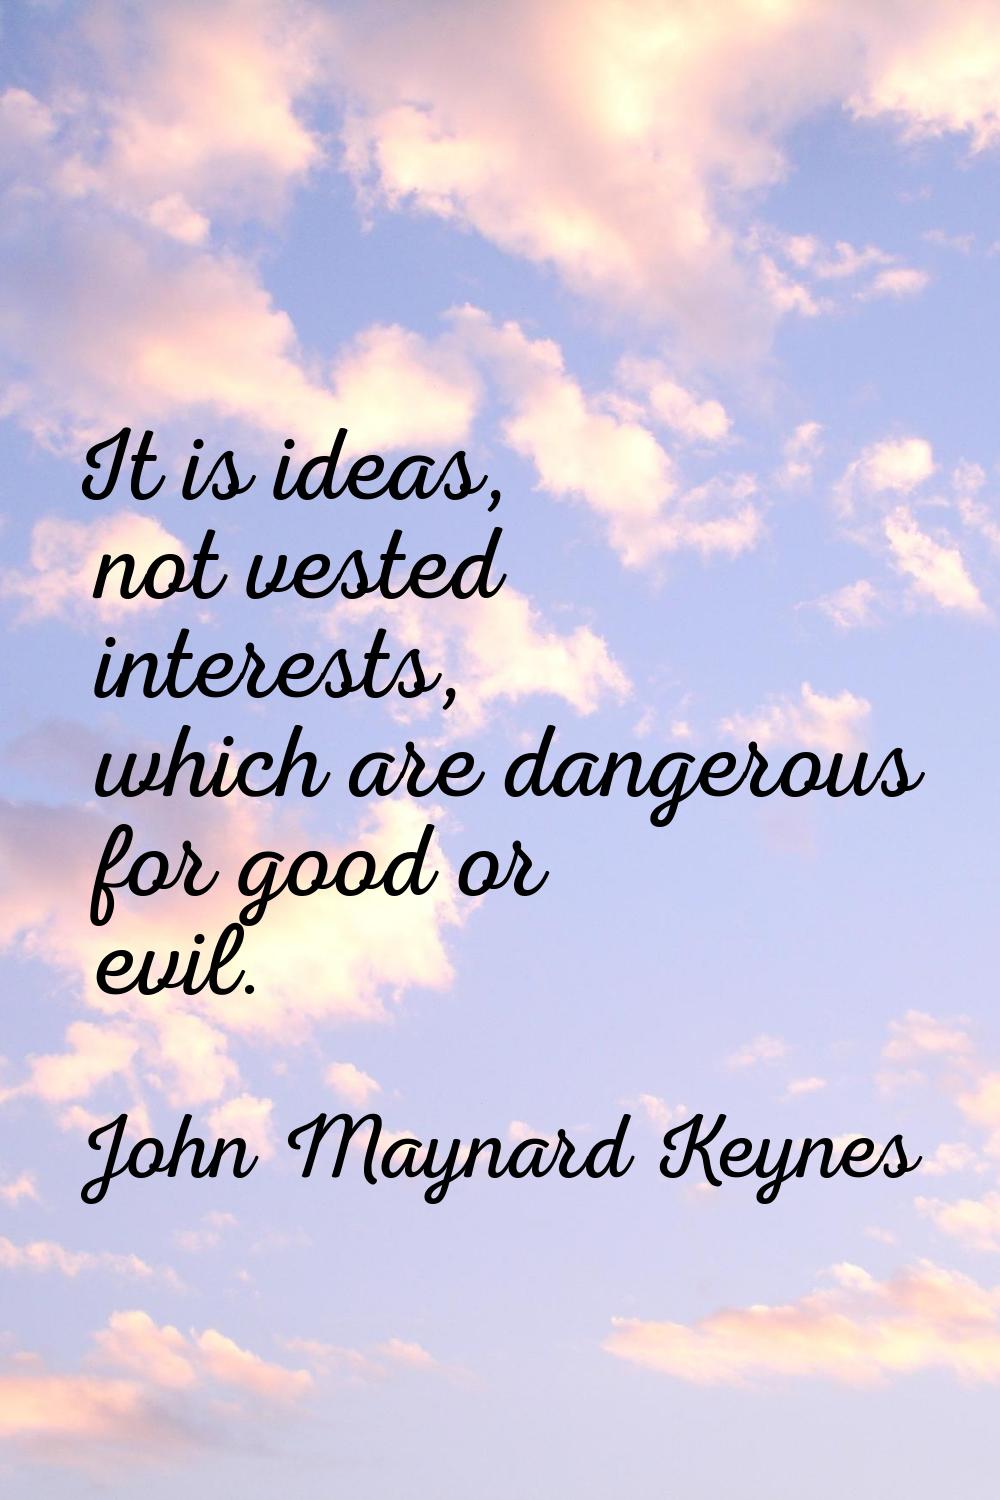 It is ideas, not vested interests, which are dangerous for good or evil.